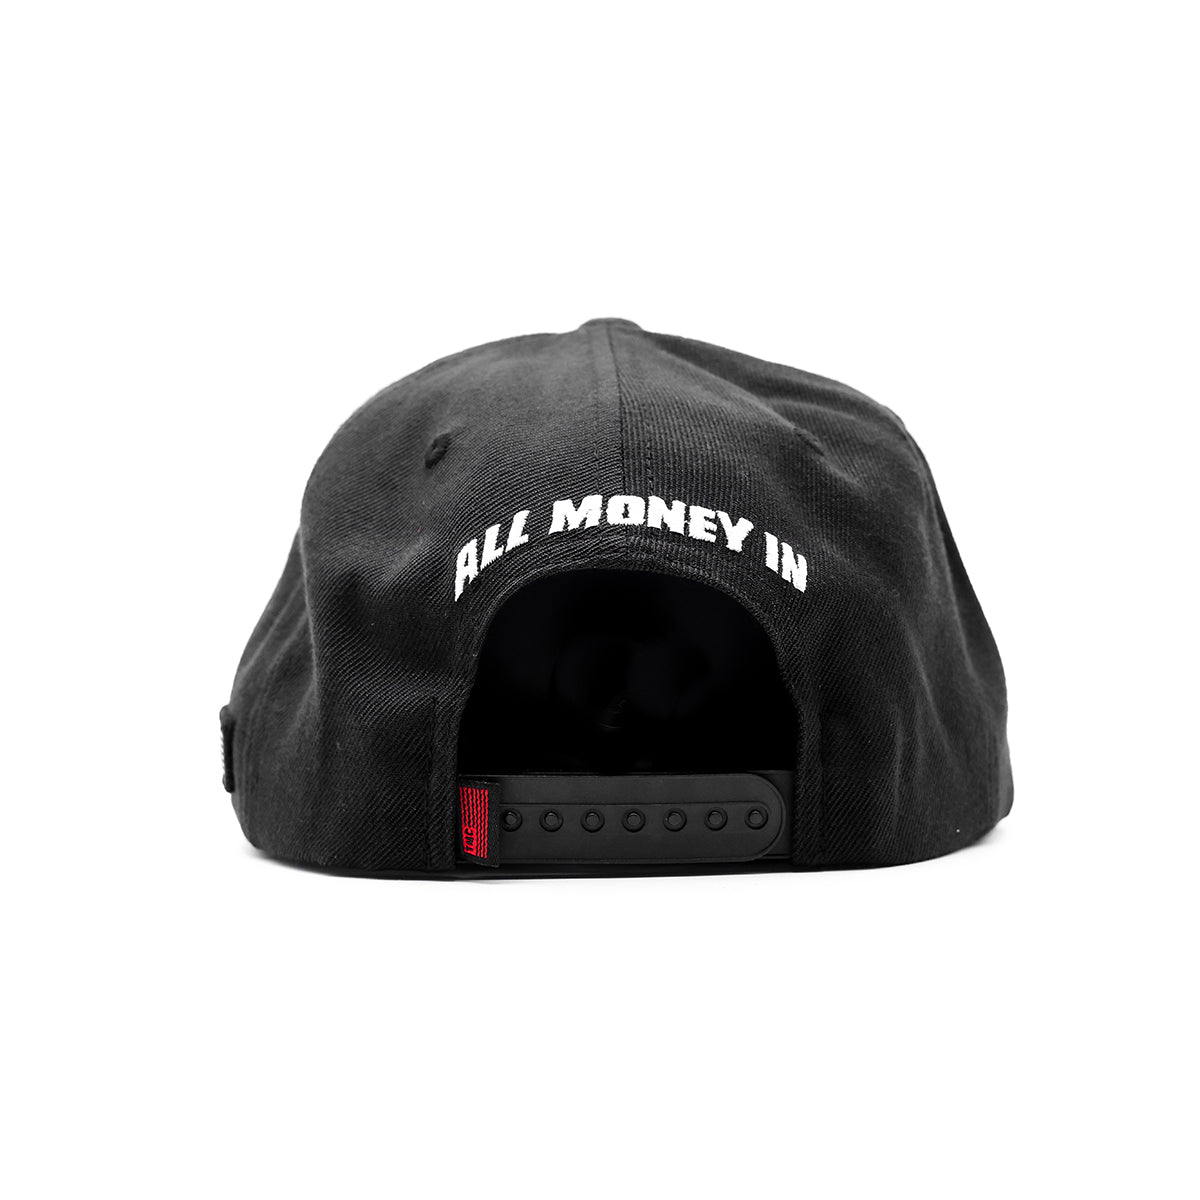 All Money In Armored Truck Limited Edition Snapback - Black/White - Back